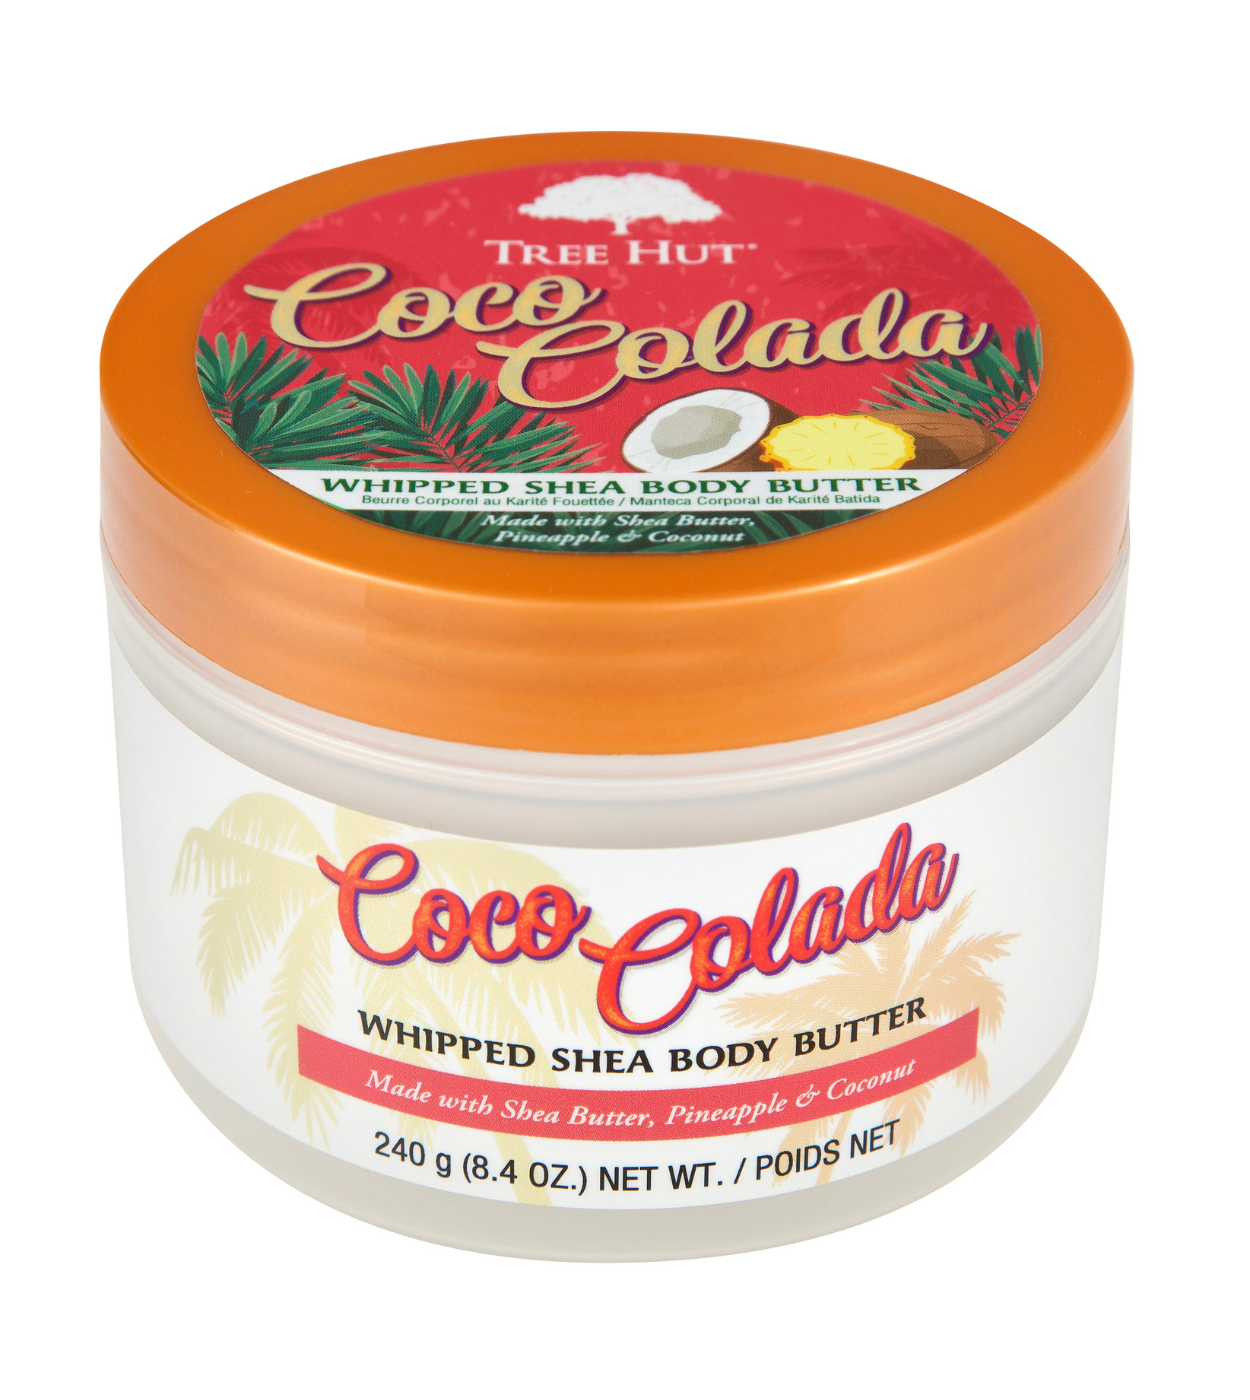 Whipped Shea Body Butter Coco Colada